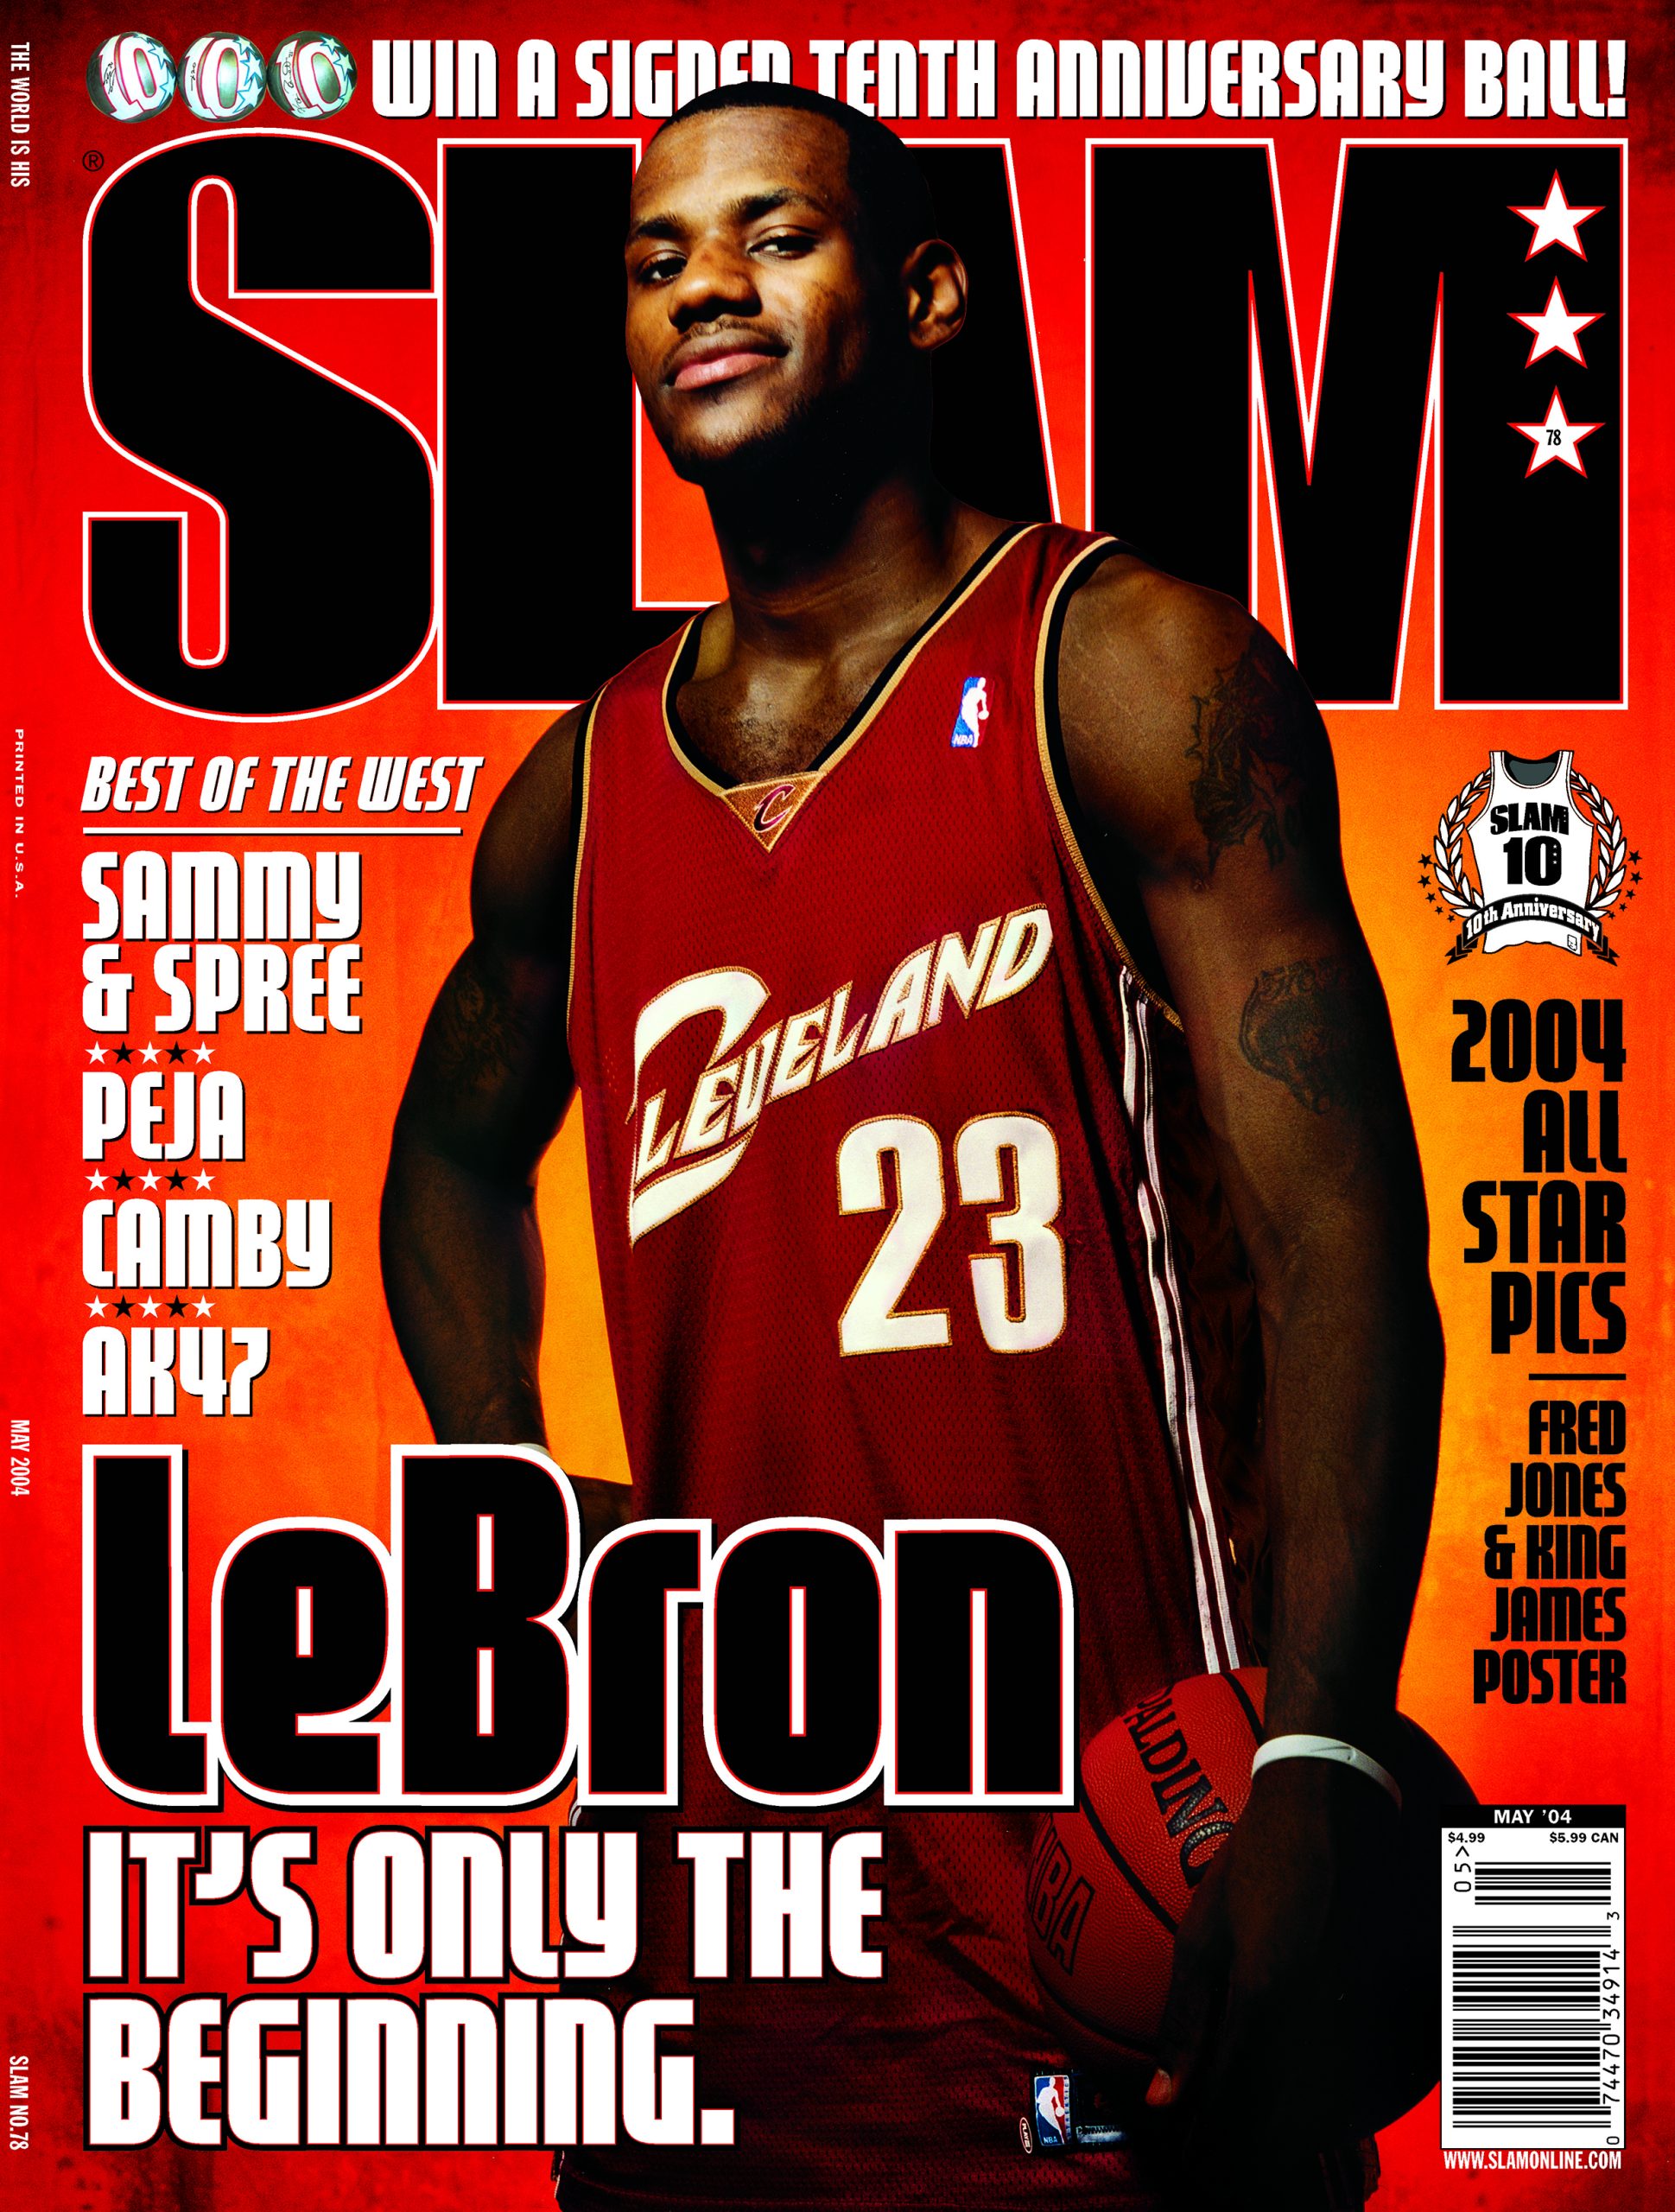 THE 30 PLAYERS WHO DEFINED SLAM’S 30 YEARS: LeBron James